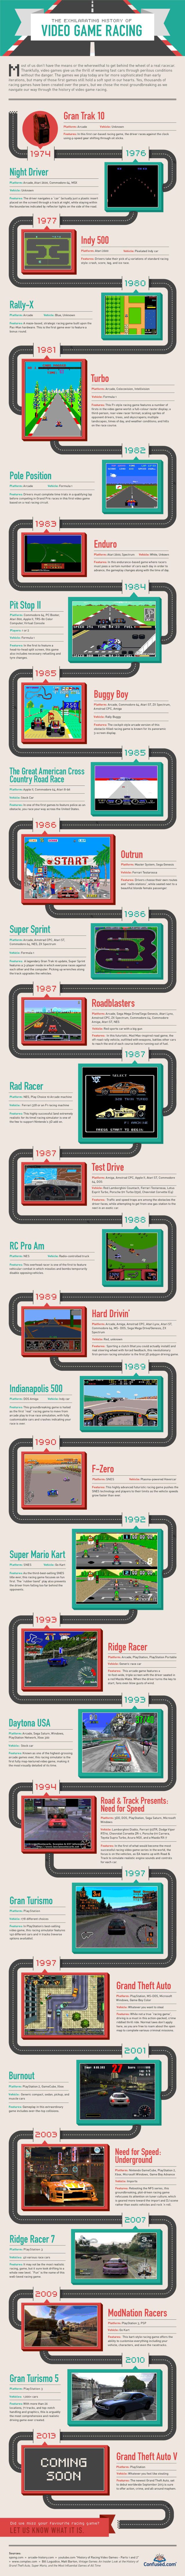 Racing Video Games from 1974 to the Present